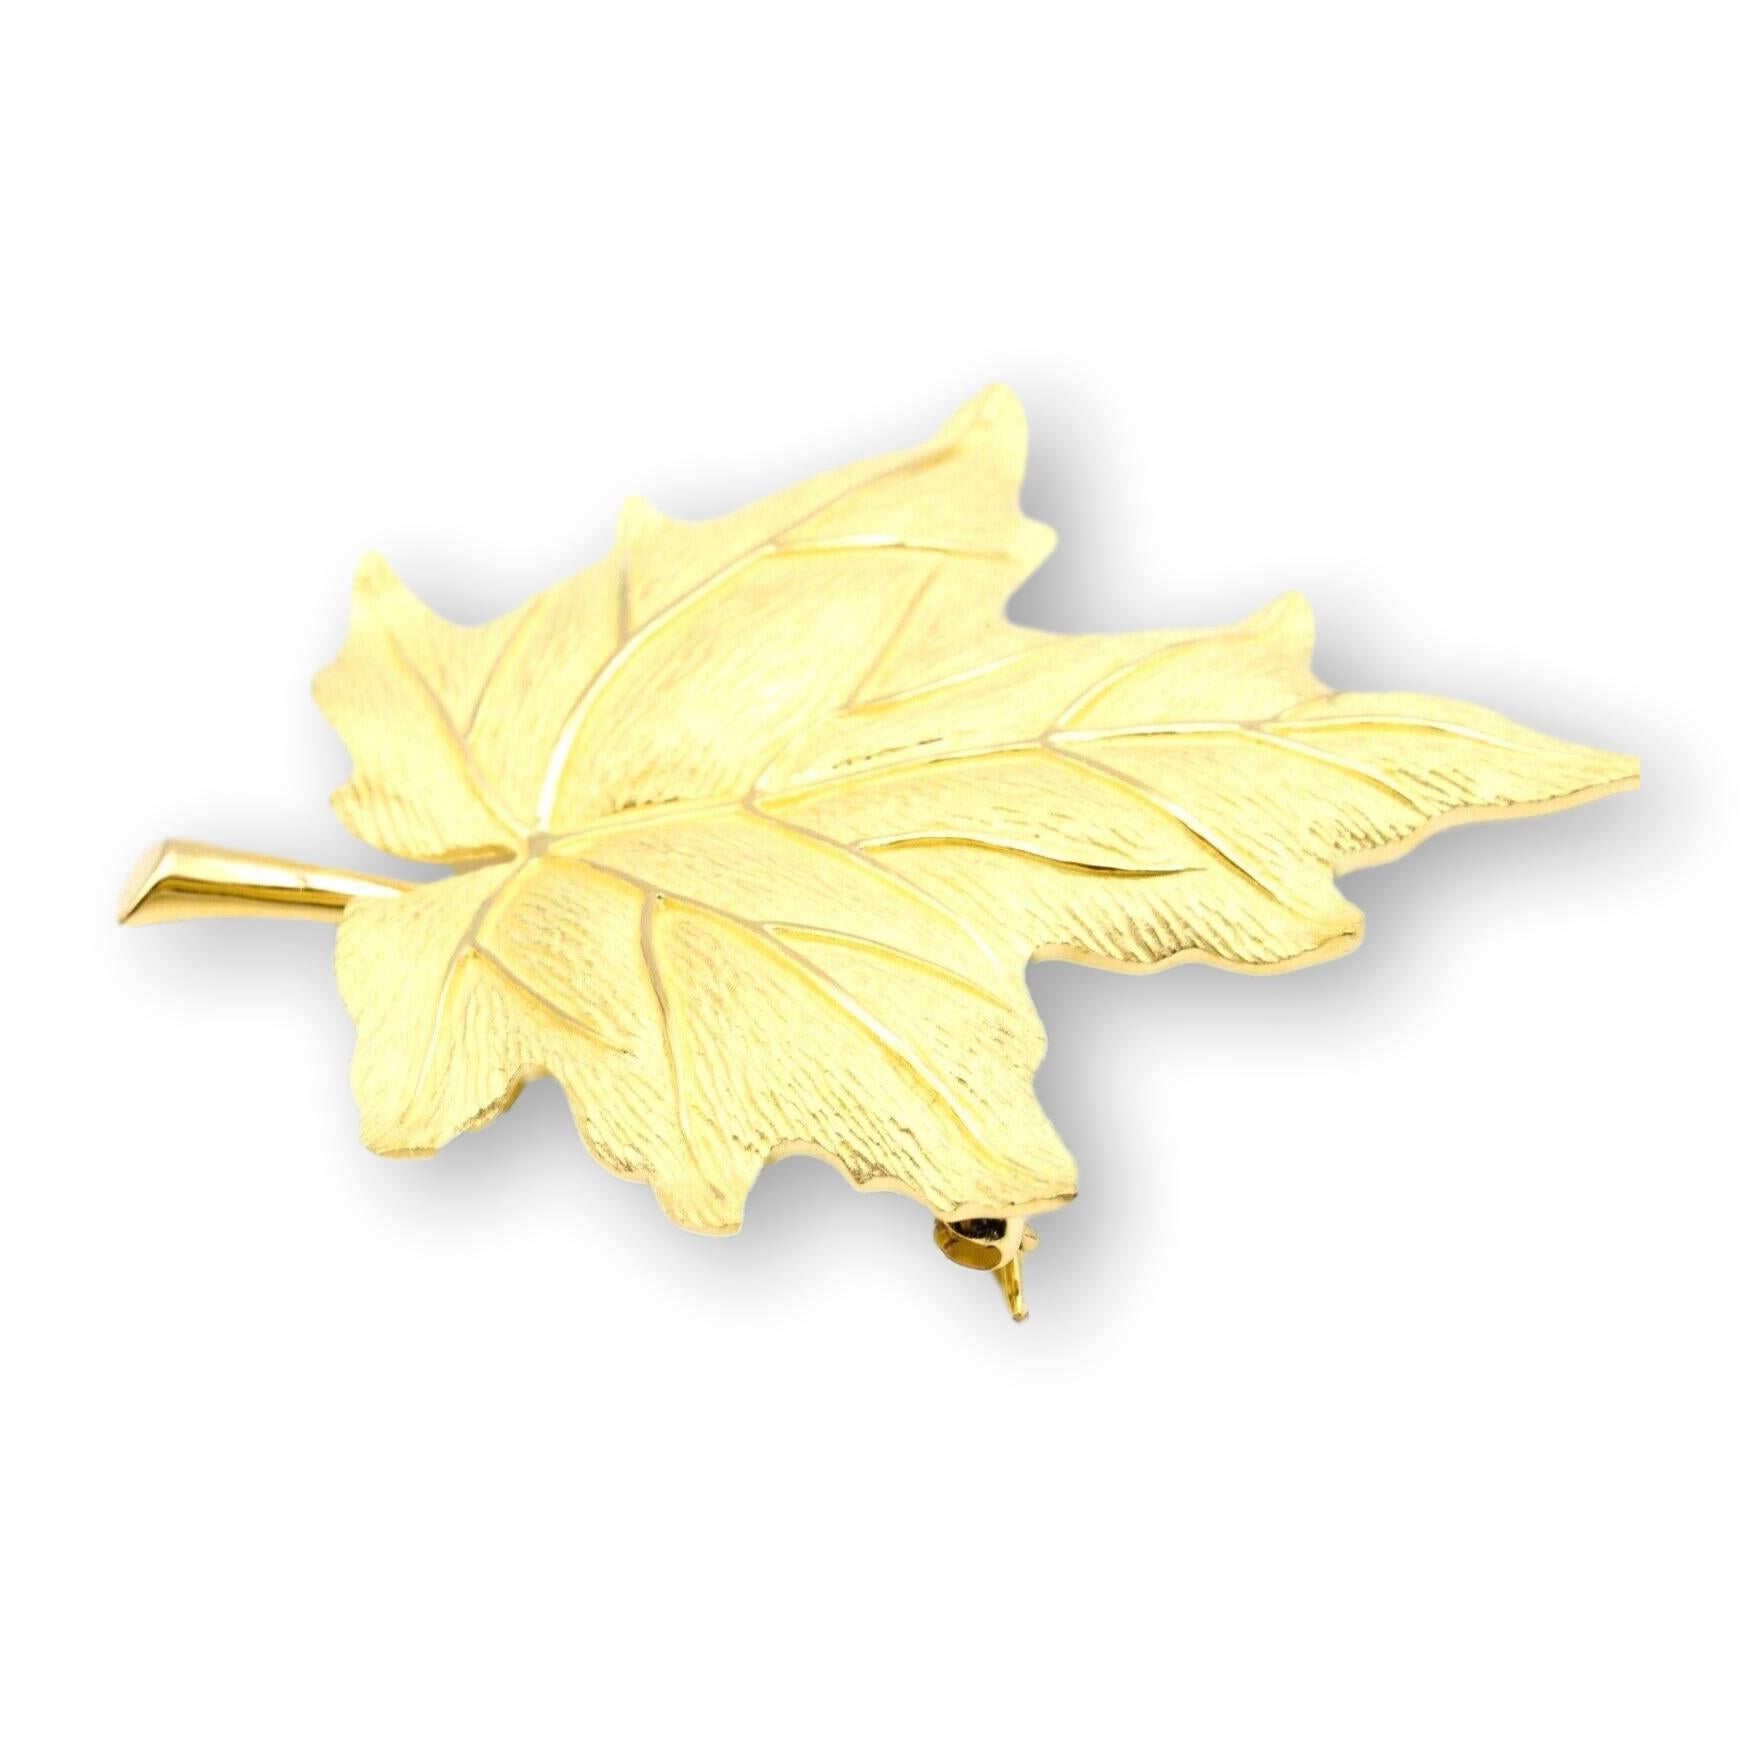 Tiffany & Co. Vintage Sugar Maple Leaf brooch finely crafted in 18 Karat Yellow gold with a Florentine matte finish at the front and high polish gold at the back.

Stamp: Tiffany & Co. 750
Length: 1.6cm
Width:2.0cm
Weight: 13.3 grams

Includes